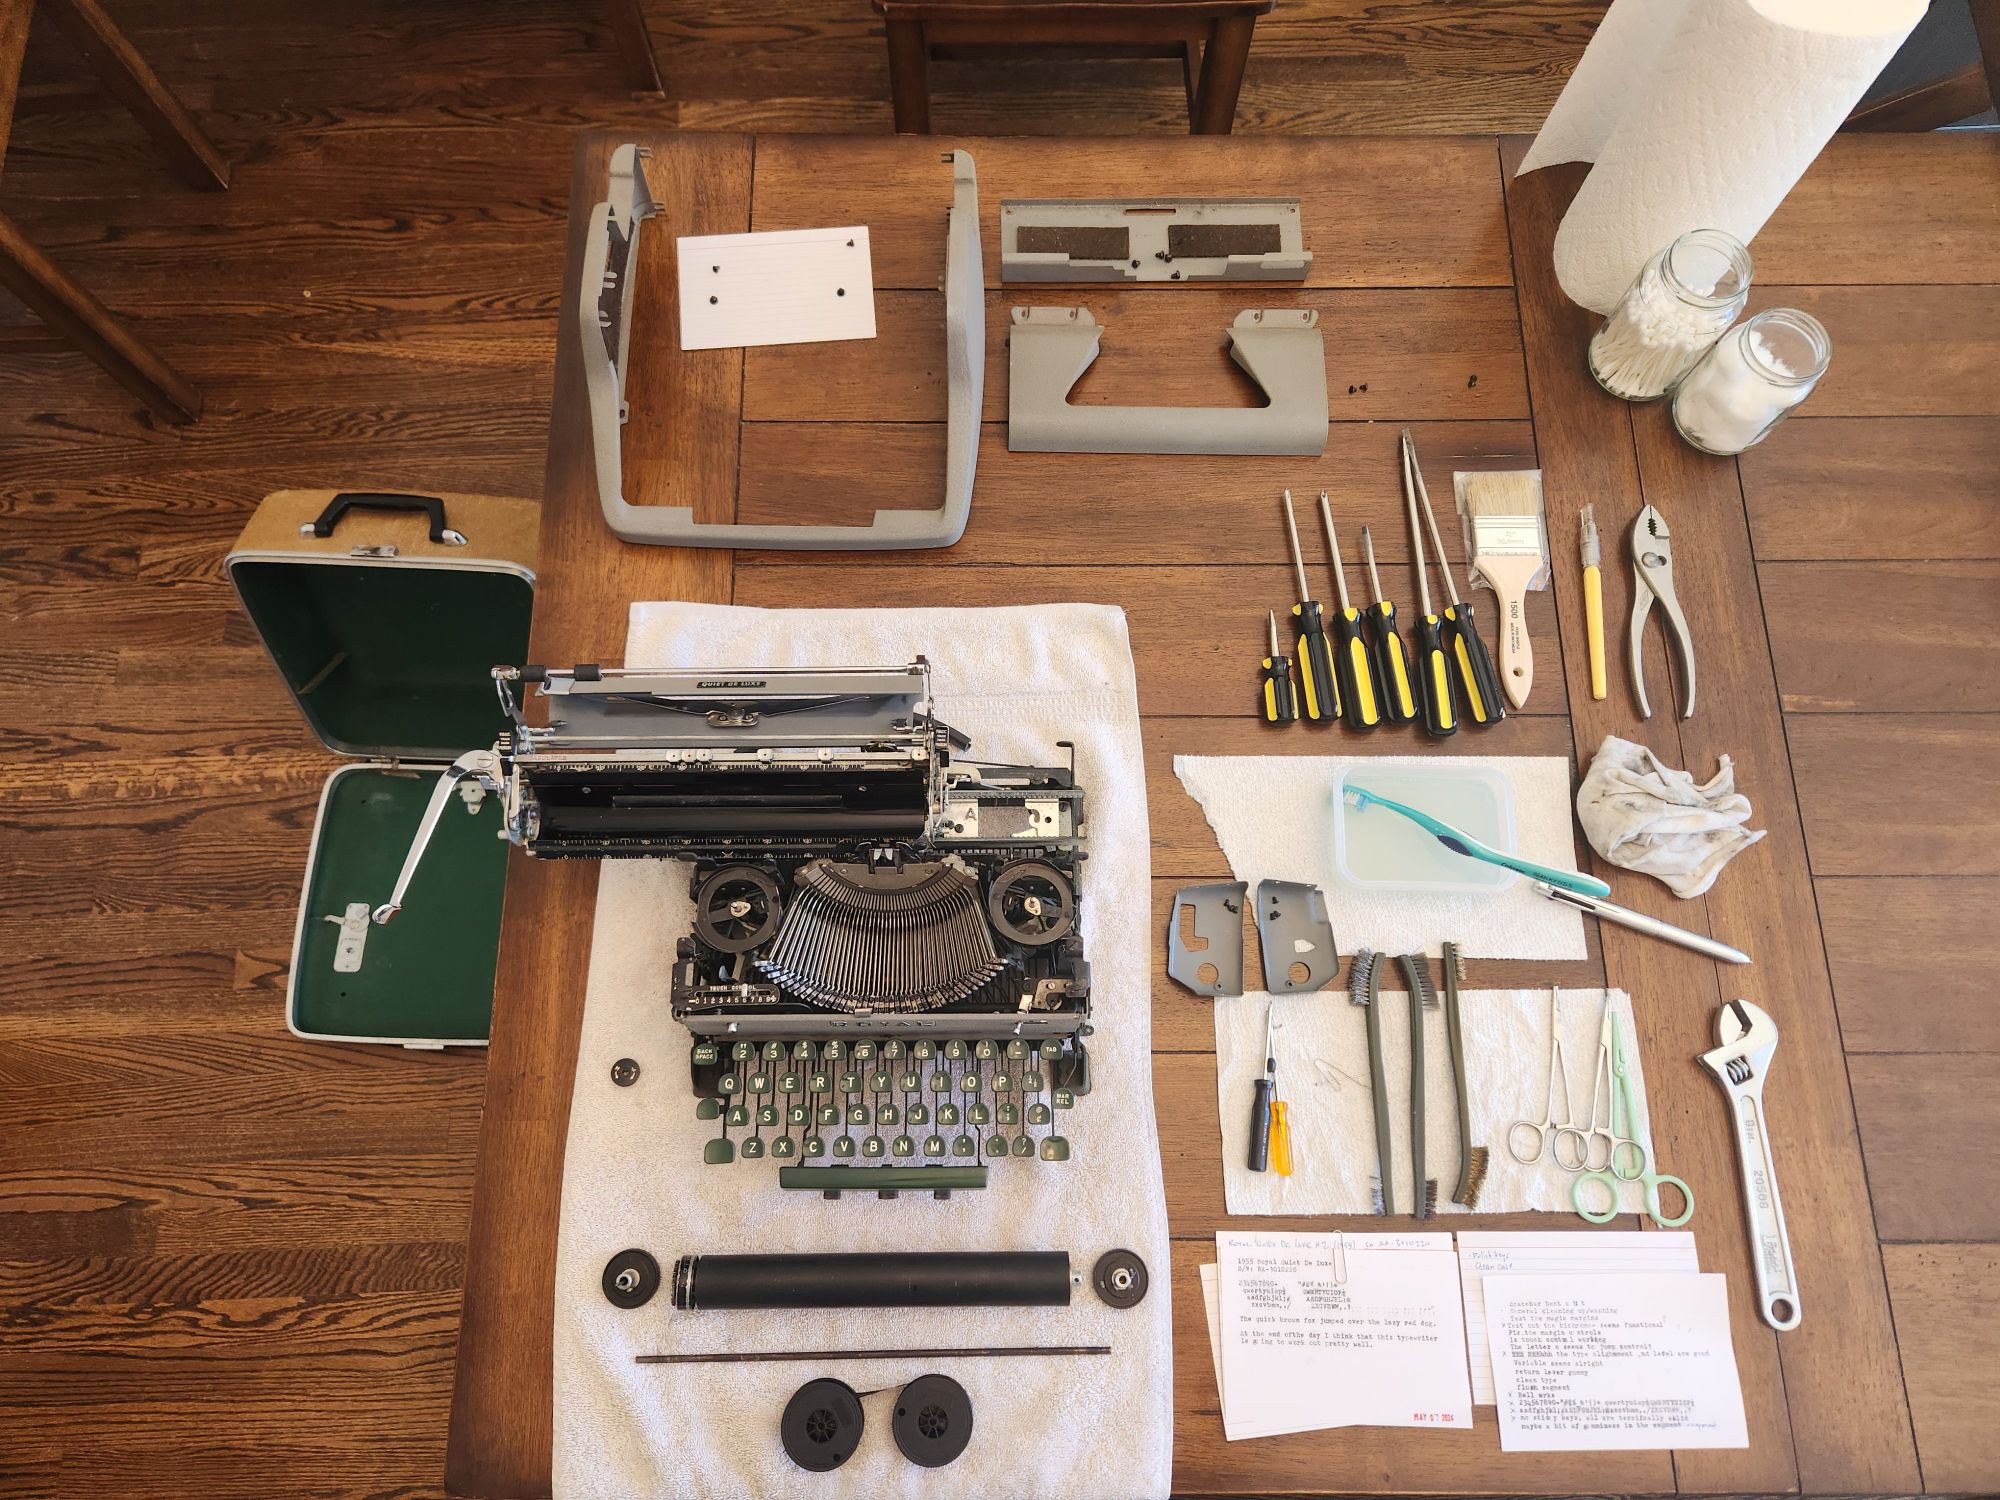 A table laid out with a white towel on which sits the dismantled skeleton of a Royal typewriter. Around it are ribbon spools, a platen and knobs, the various parts of the exterior body, tools, brushes, and repair instruments.